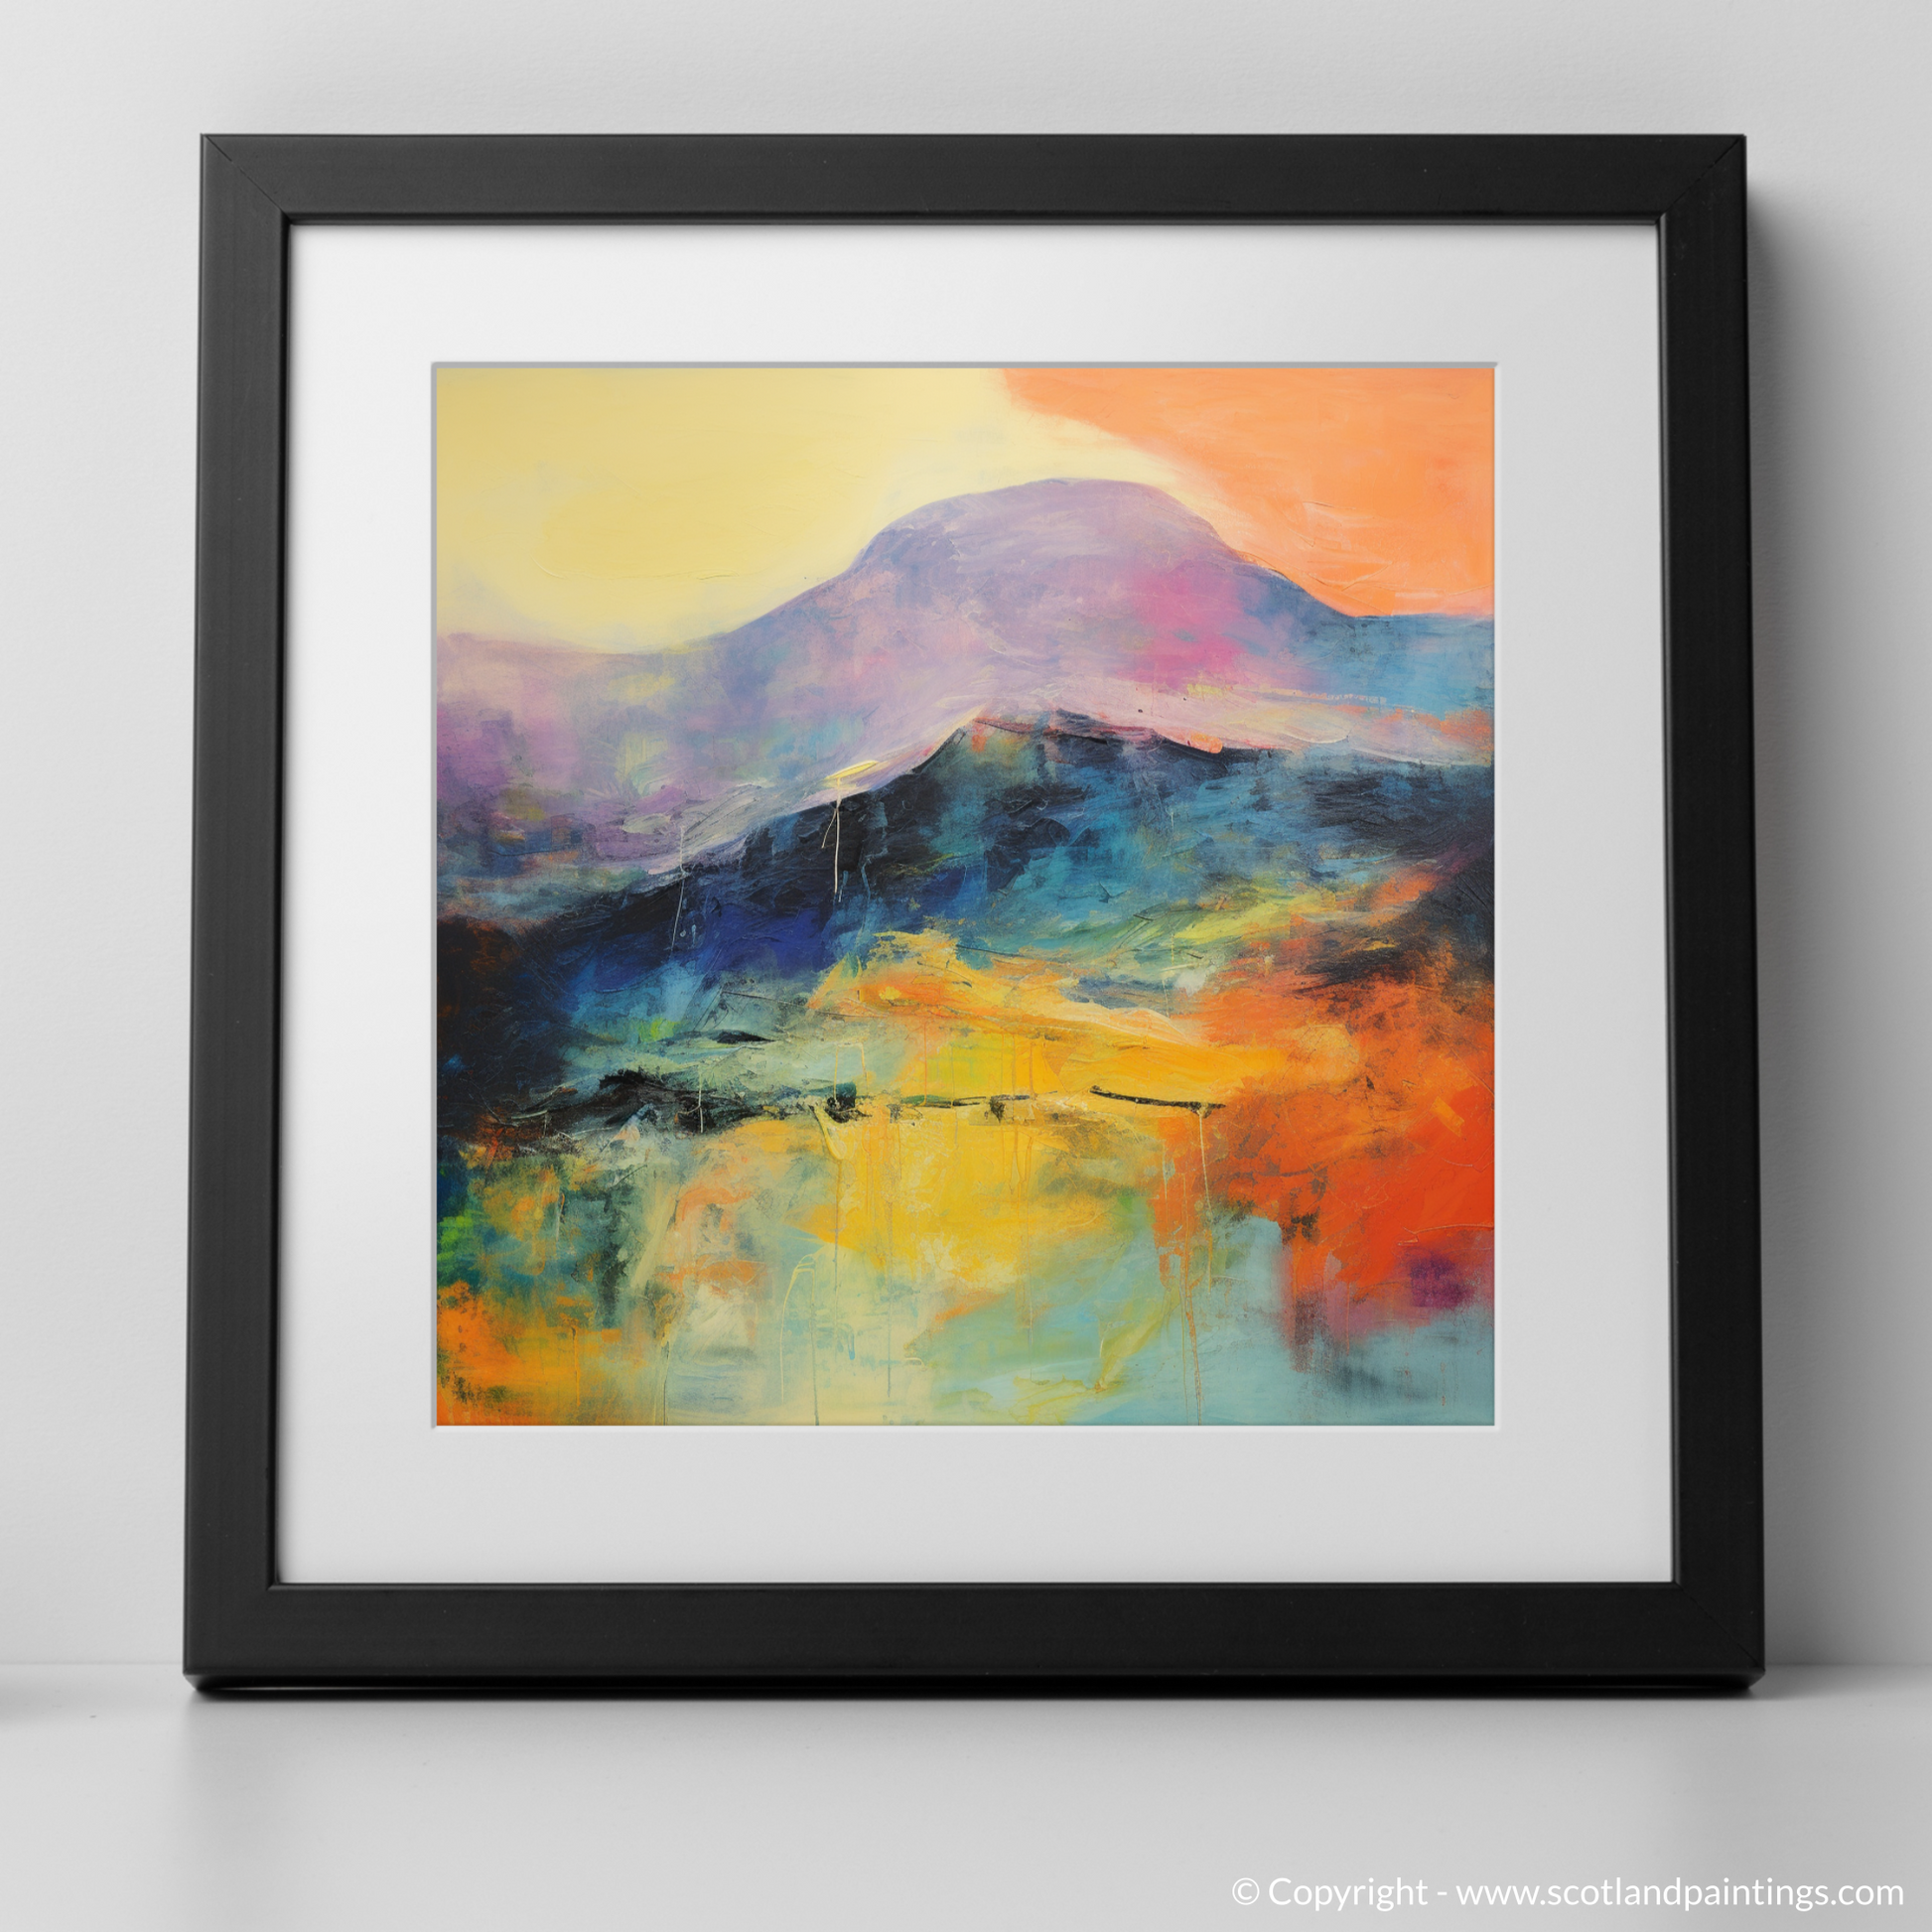 Art Print of Ben Lawers, Perth and Kinross with a black frame